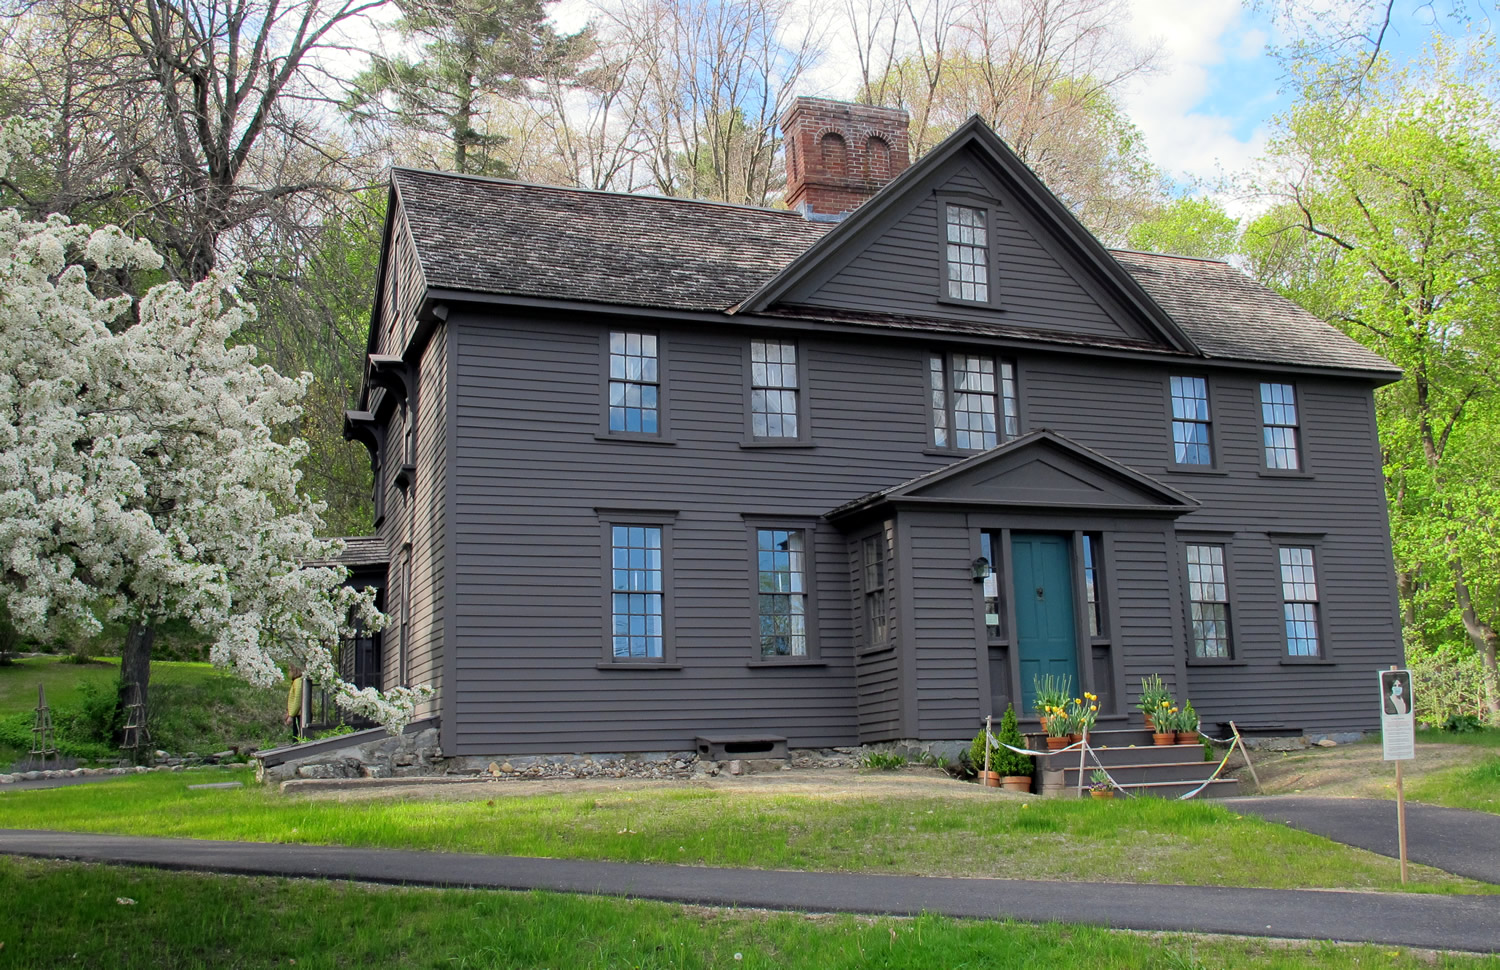 Orchard House, the Alcott residence, Concord MA